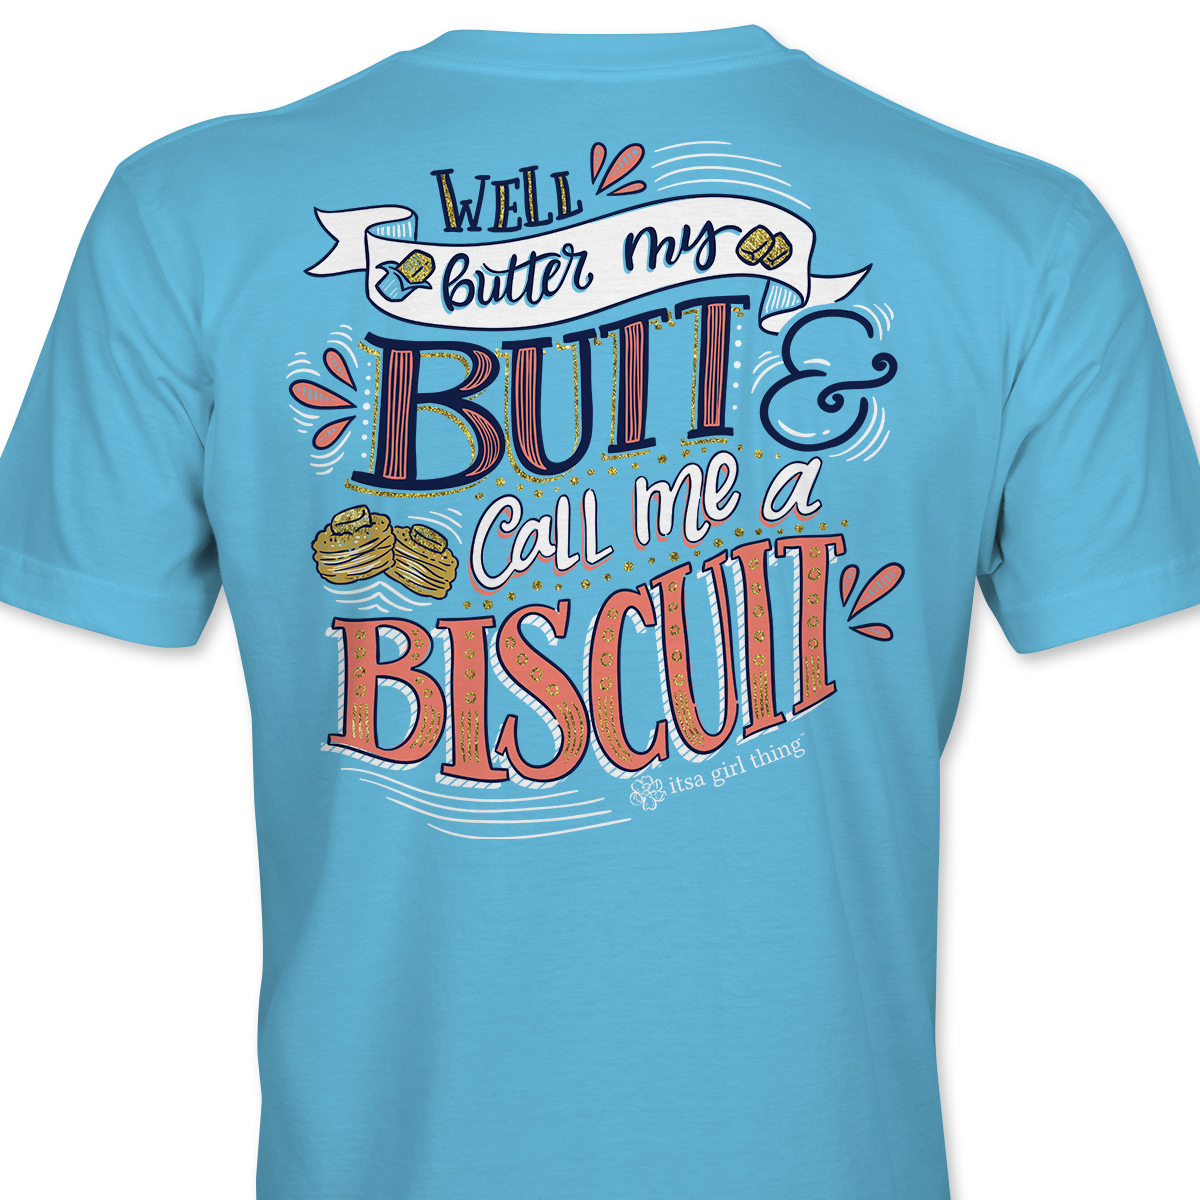 Butter Biscuit- Funny Southern Phrase T-Shirt